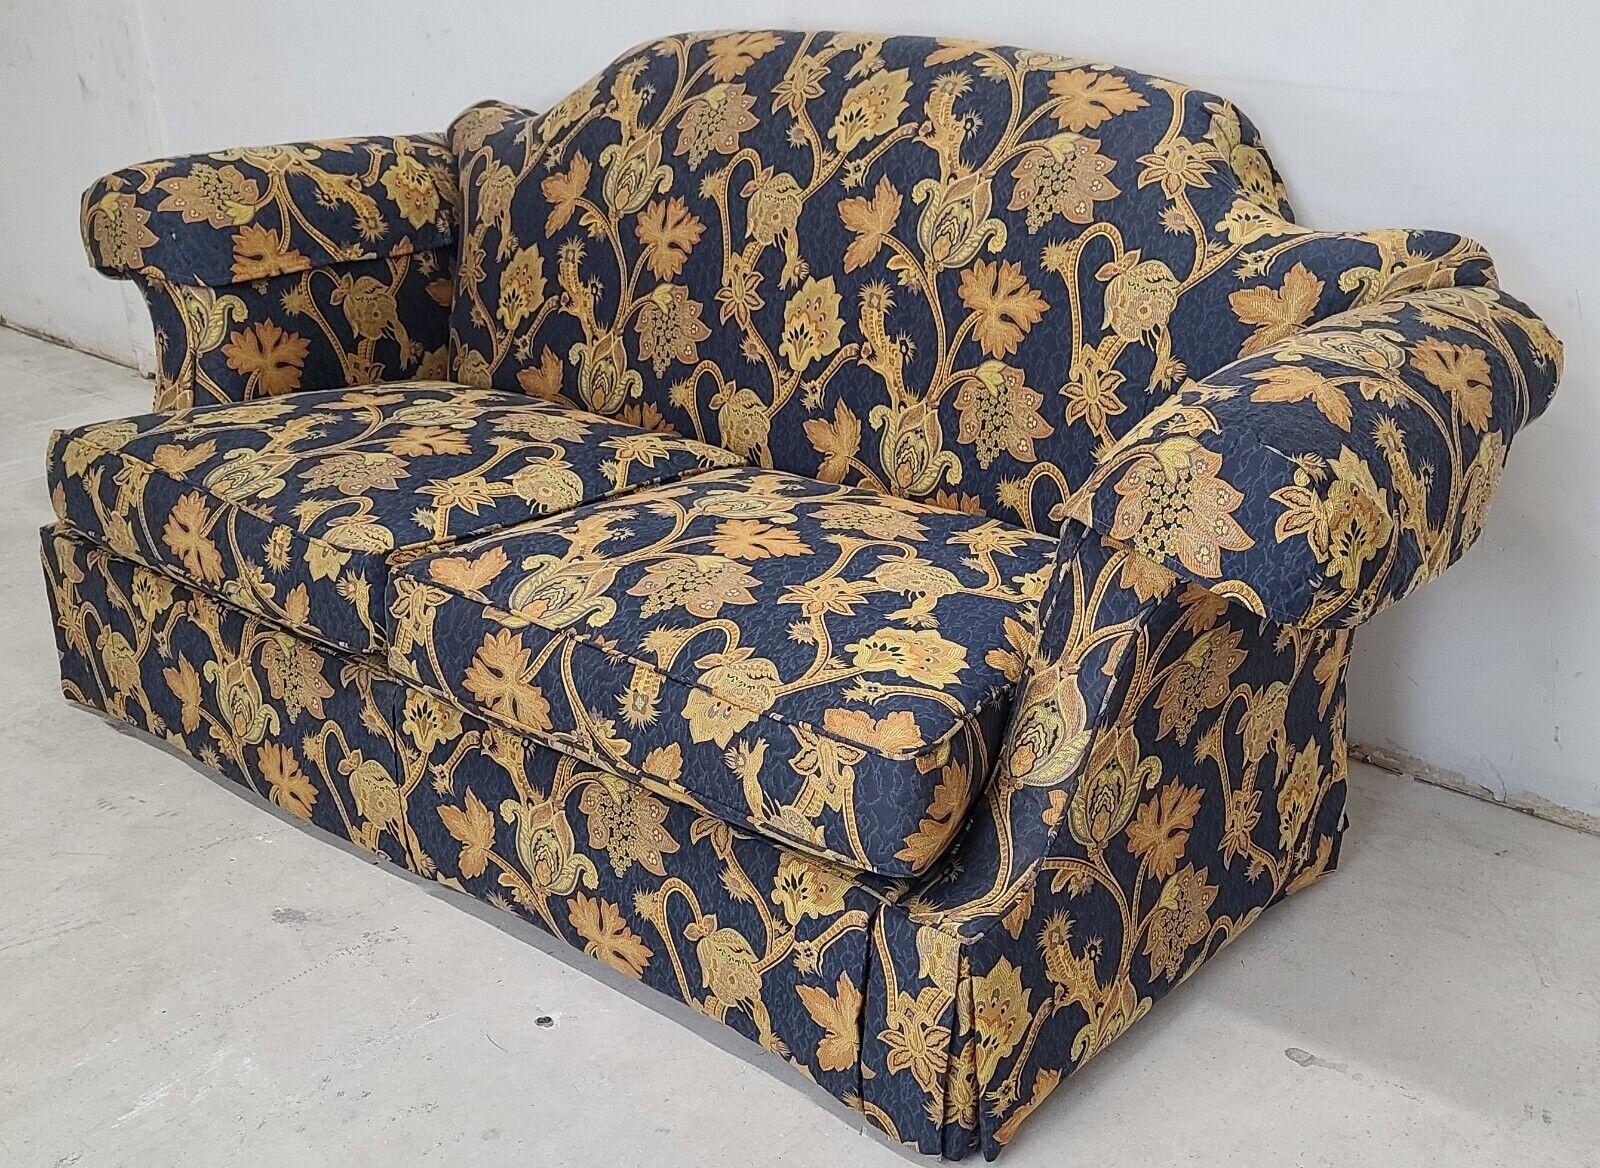 For FULL item description be sure to click on CONTINUE READING at the bottom of this listing.

Offering one of our recent palm beach estate fine furniture acquisitions of a phenomenal spotless camelback English rolled arm and rolled back sofa by